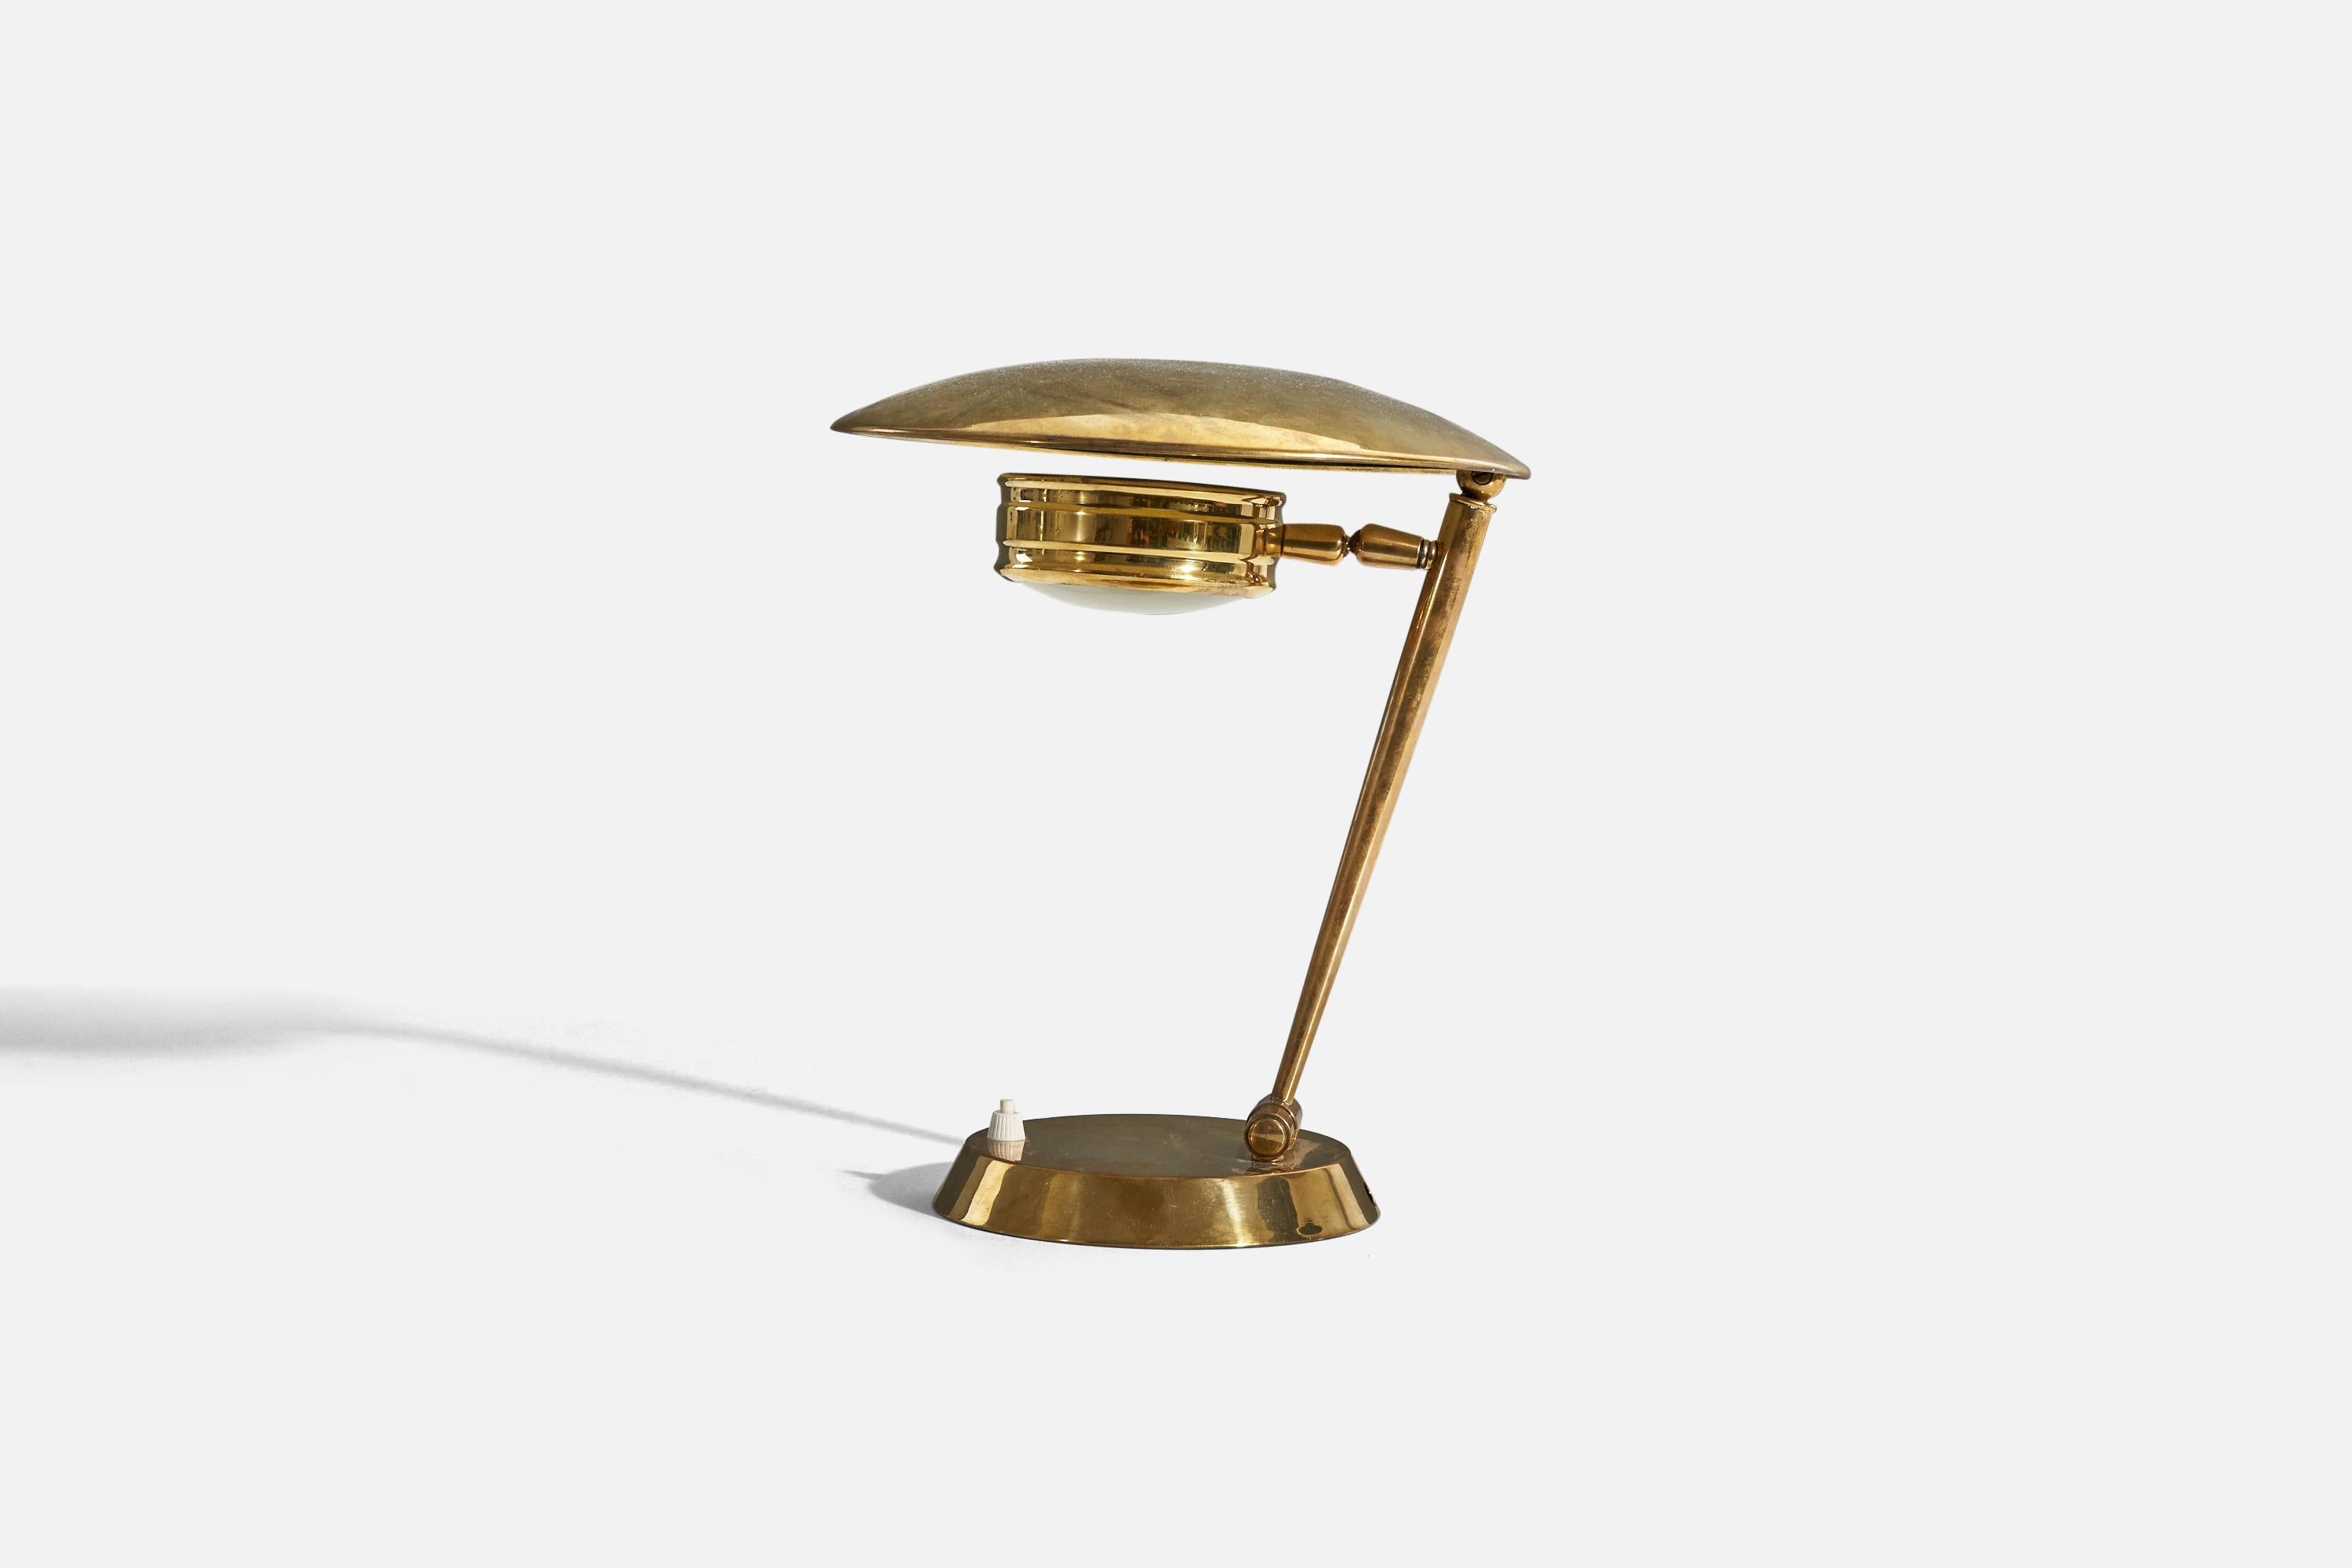 A brass table lamp designed and produced in Italy, 1940s. 

Variable dimensions, measured as illustrated in the first image.